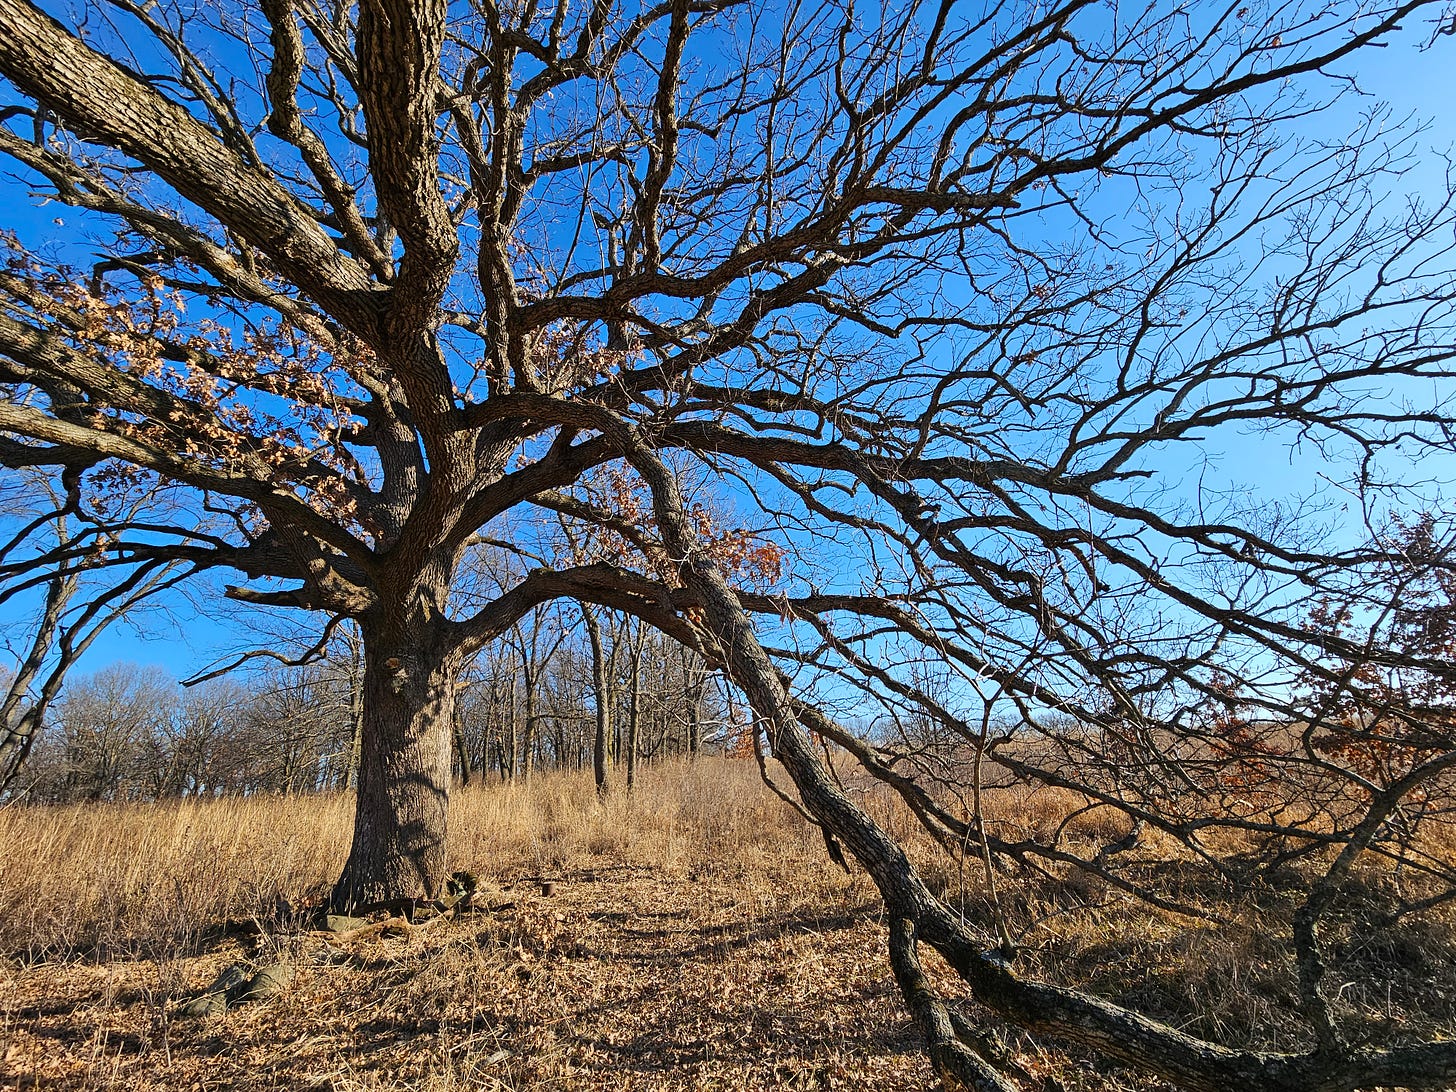 The sprawling branches of a bare oak tree fill the foreground. Around it is a field of tall, dry, brown grasses, with a few other trees visible in the background. Blue sky frames the shot.